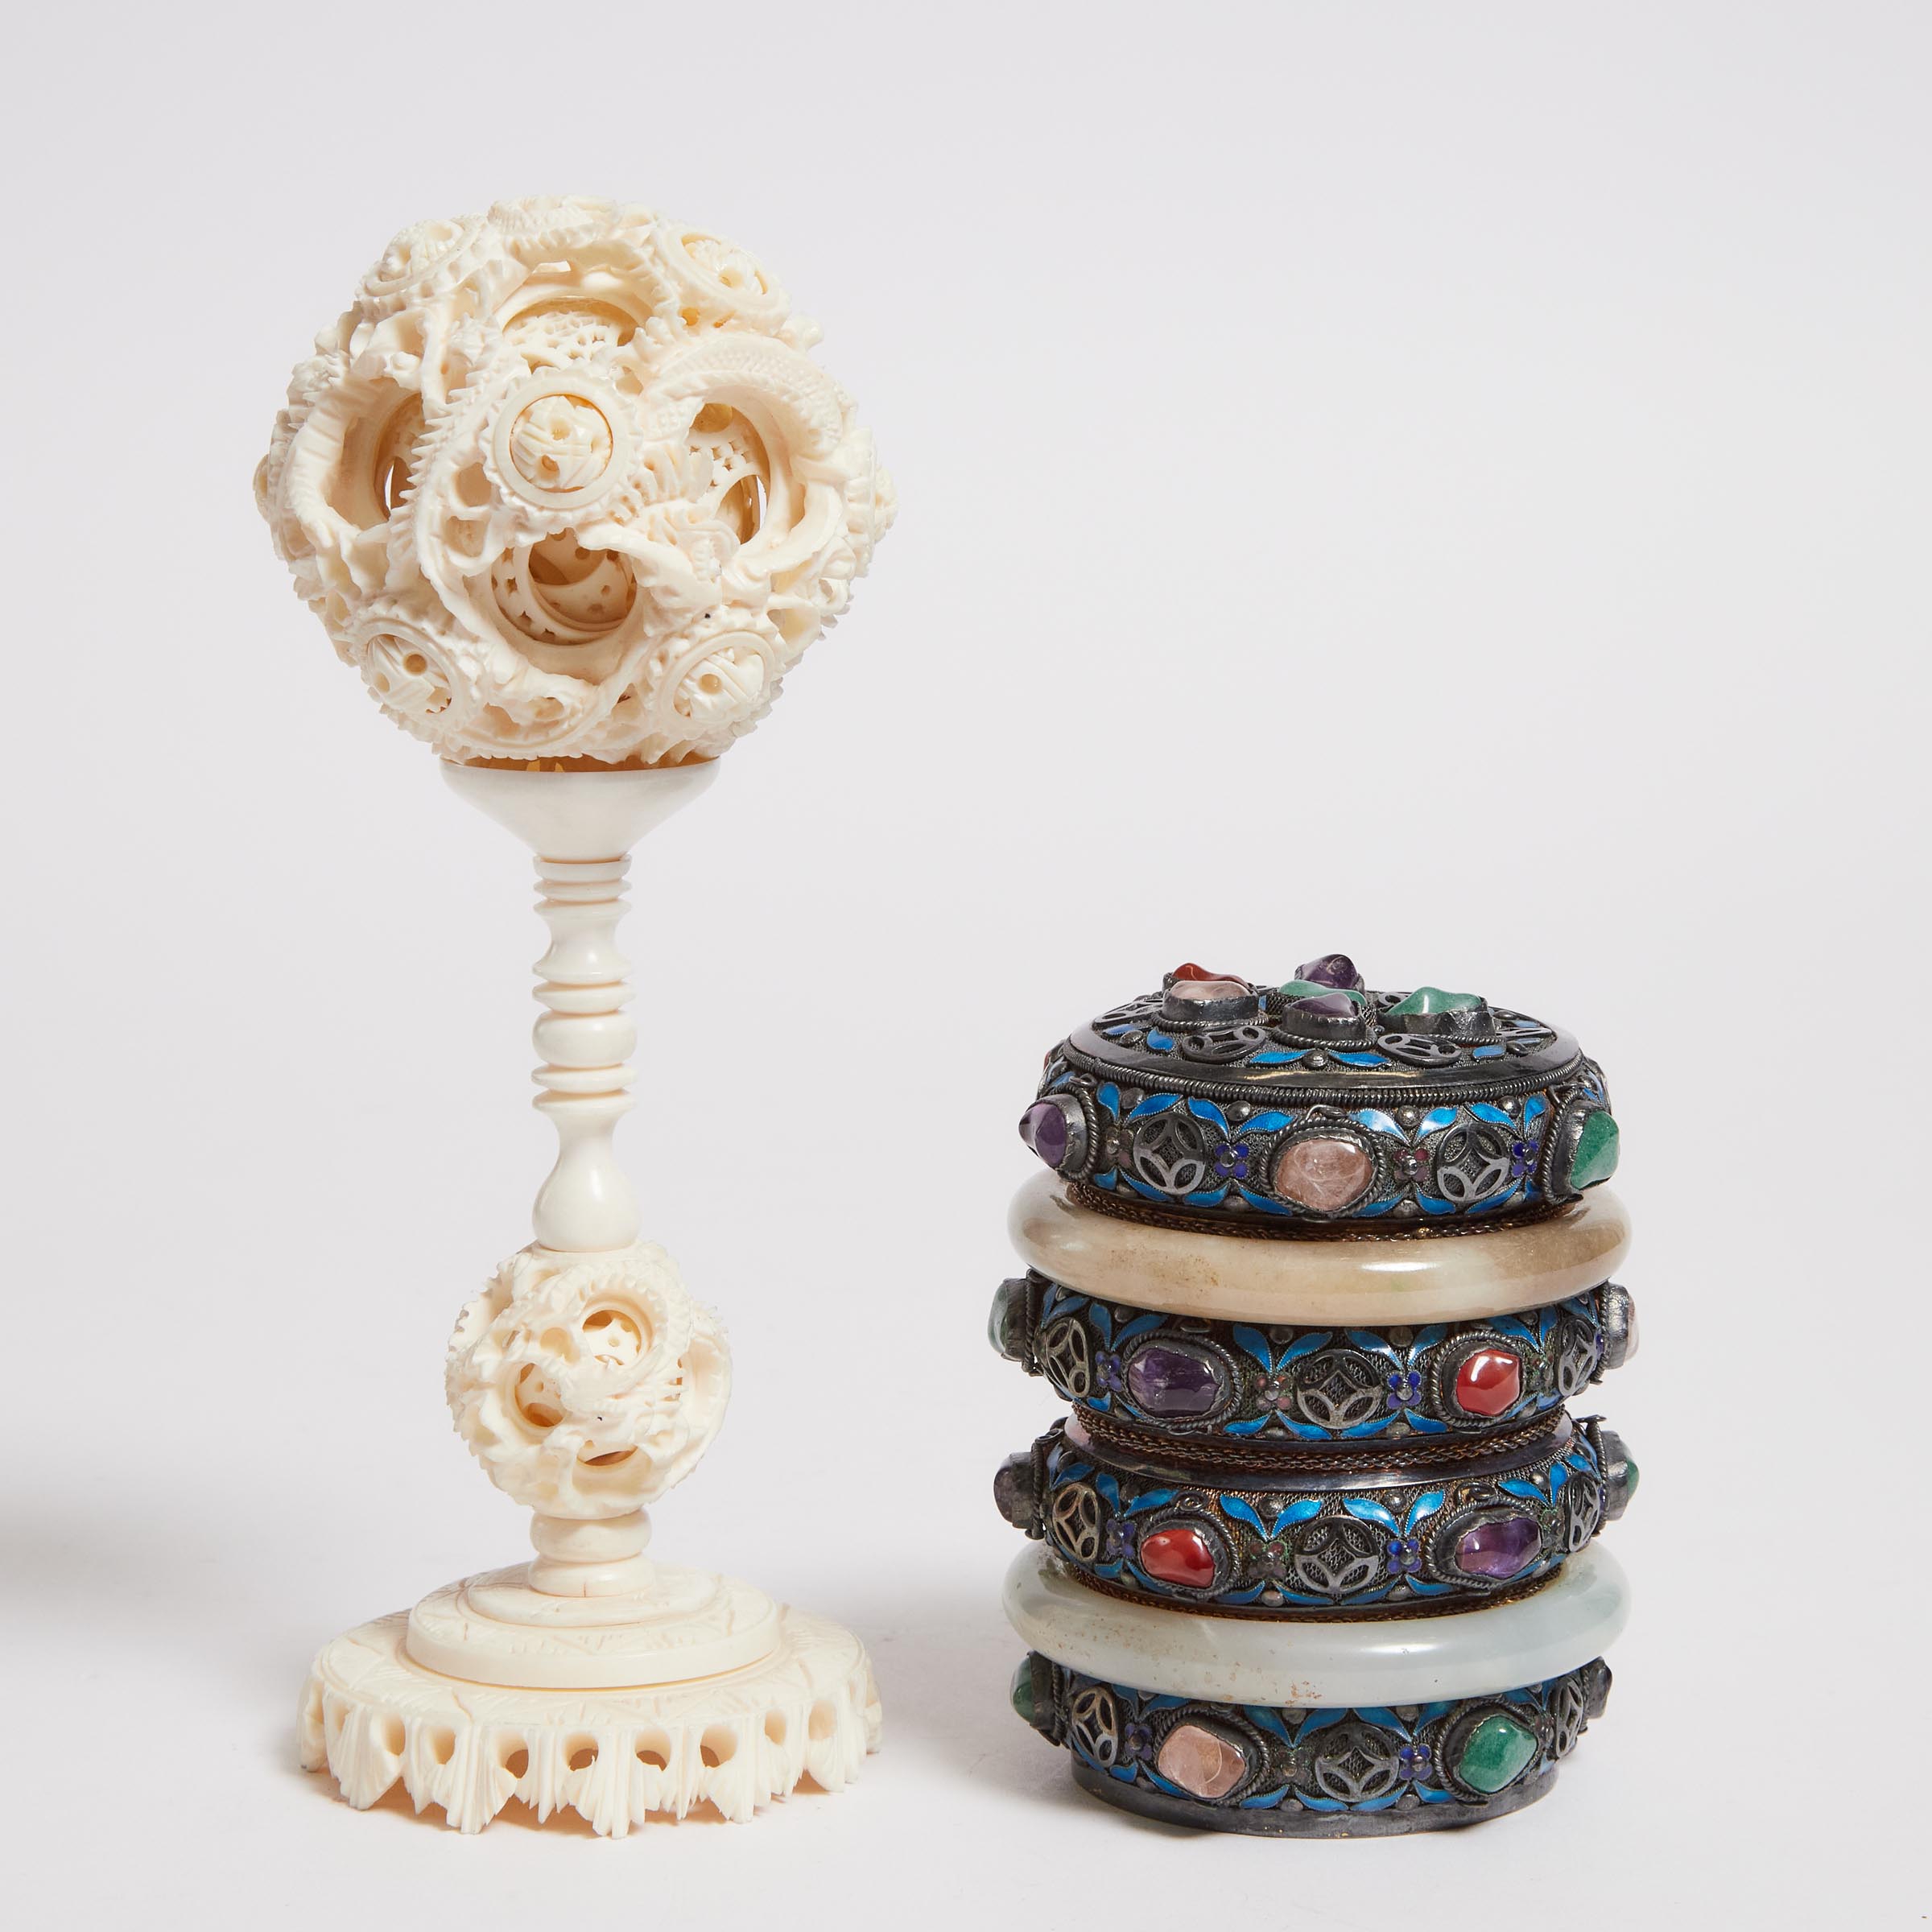 An Ivory Puzzle Ball and Stand, Together